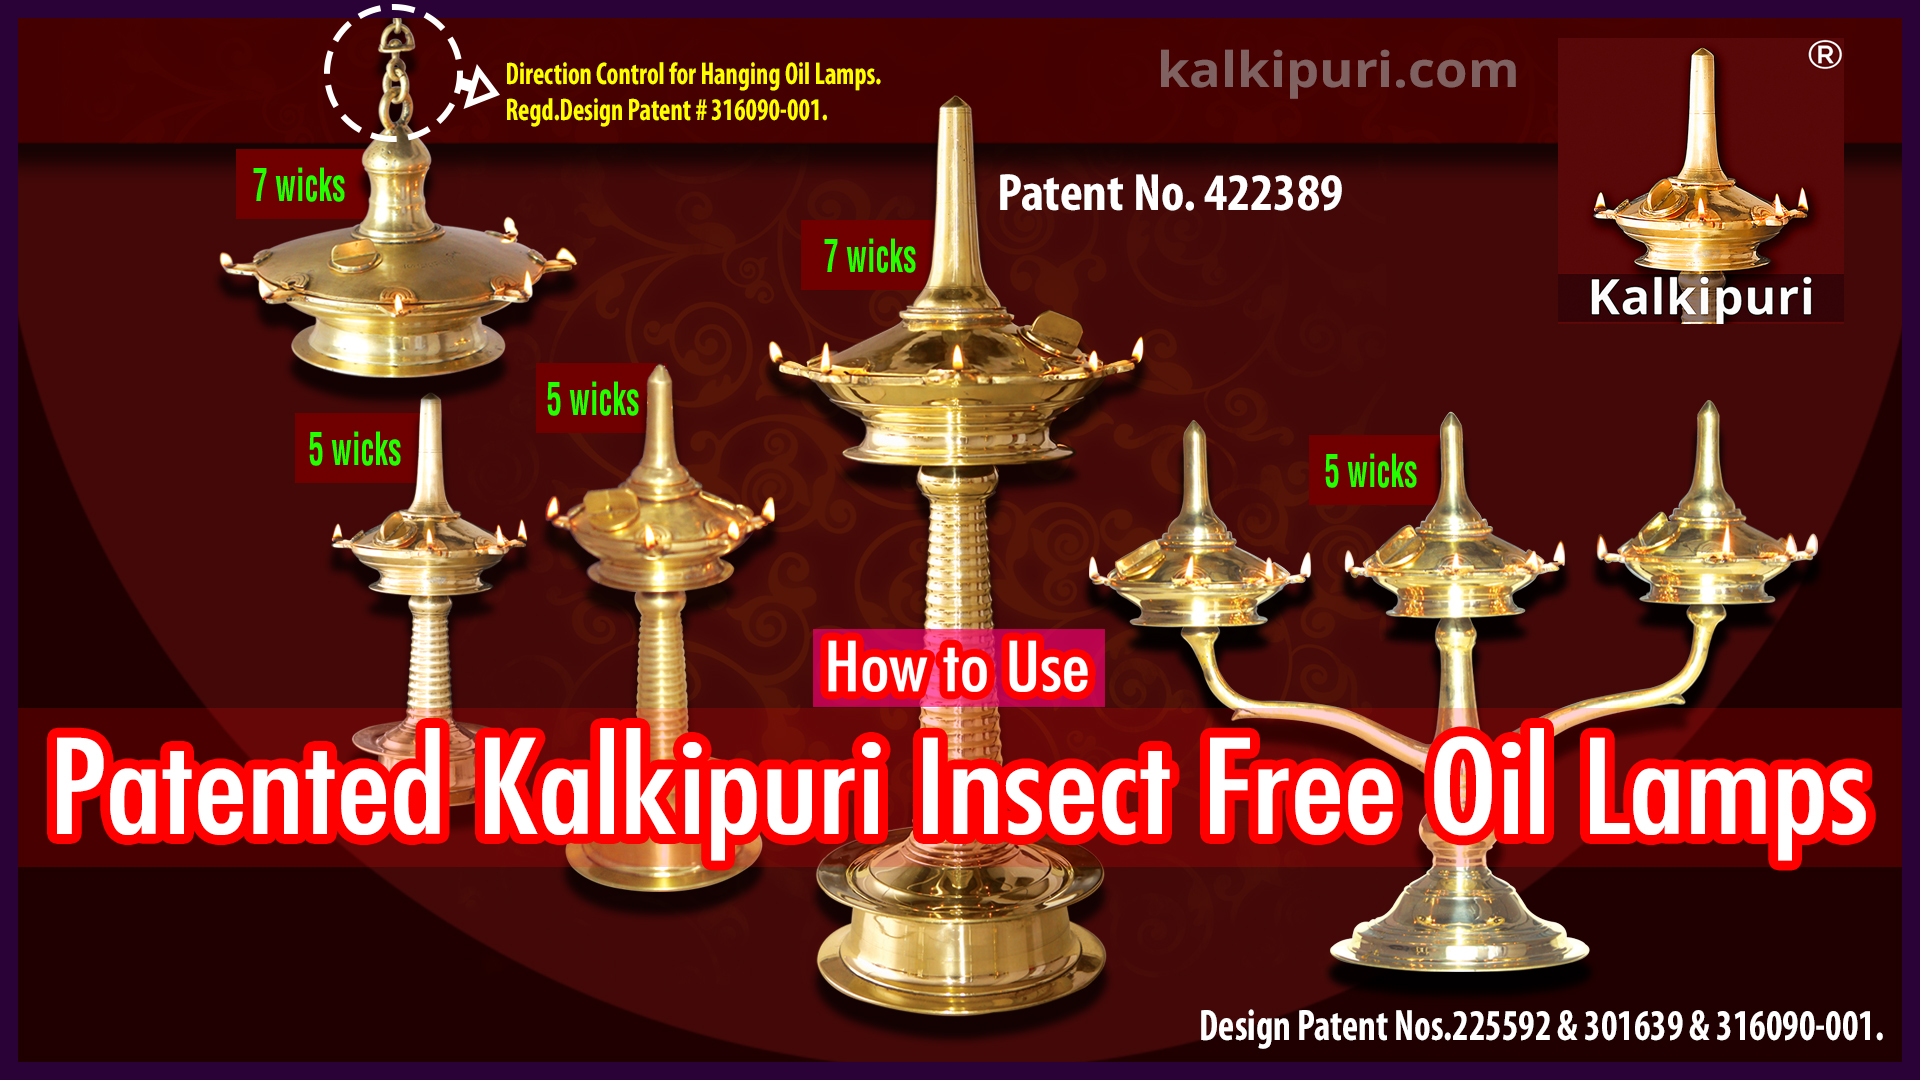 How to Use Kalkipuri Insect Free Oil Lamps